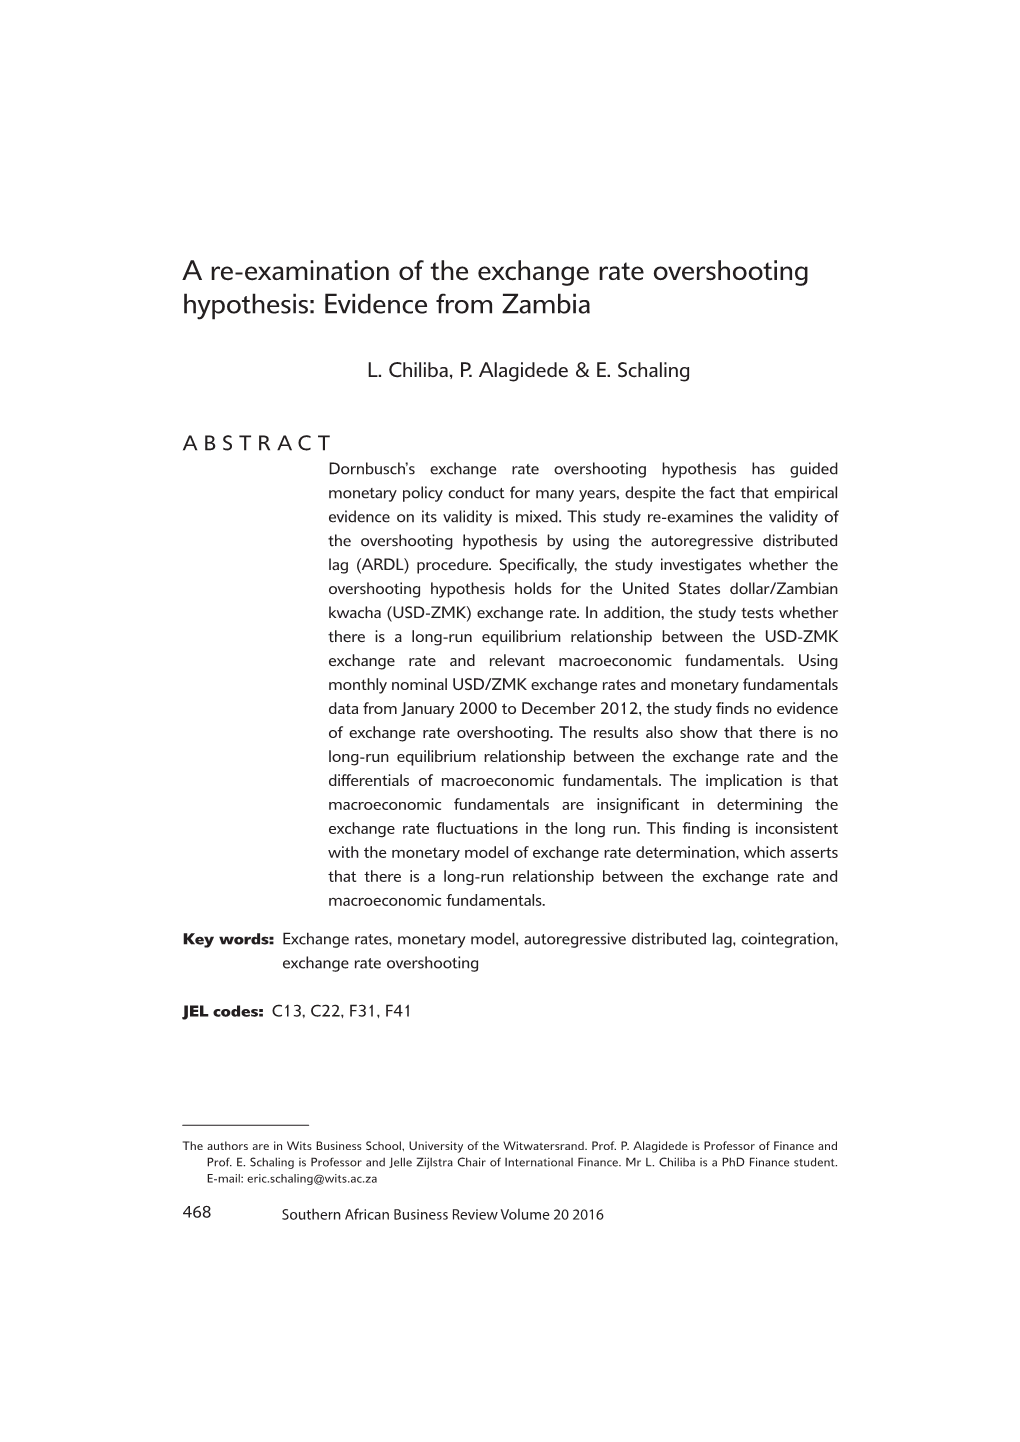 A Re-Examination of the Exchange Rate Overshooting Hypothesis: Evidence from Zambia